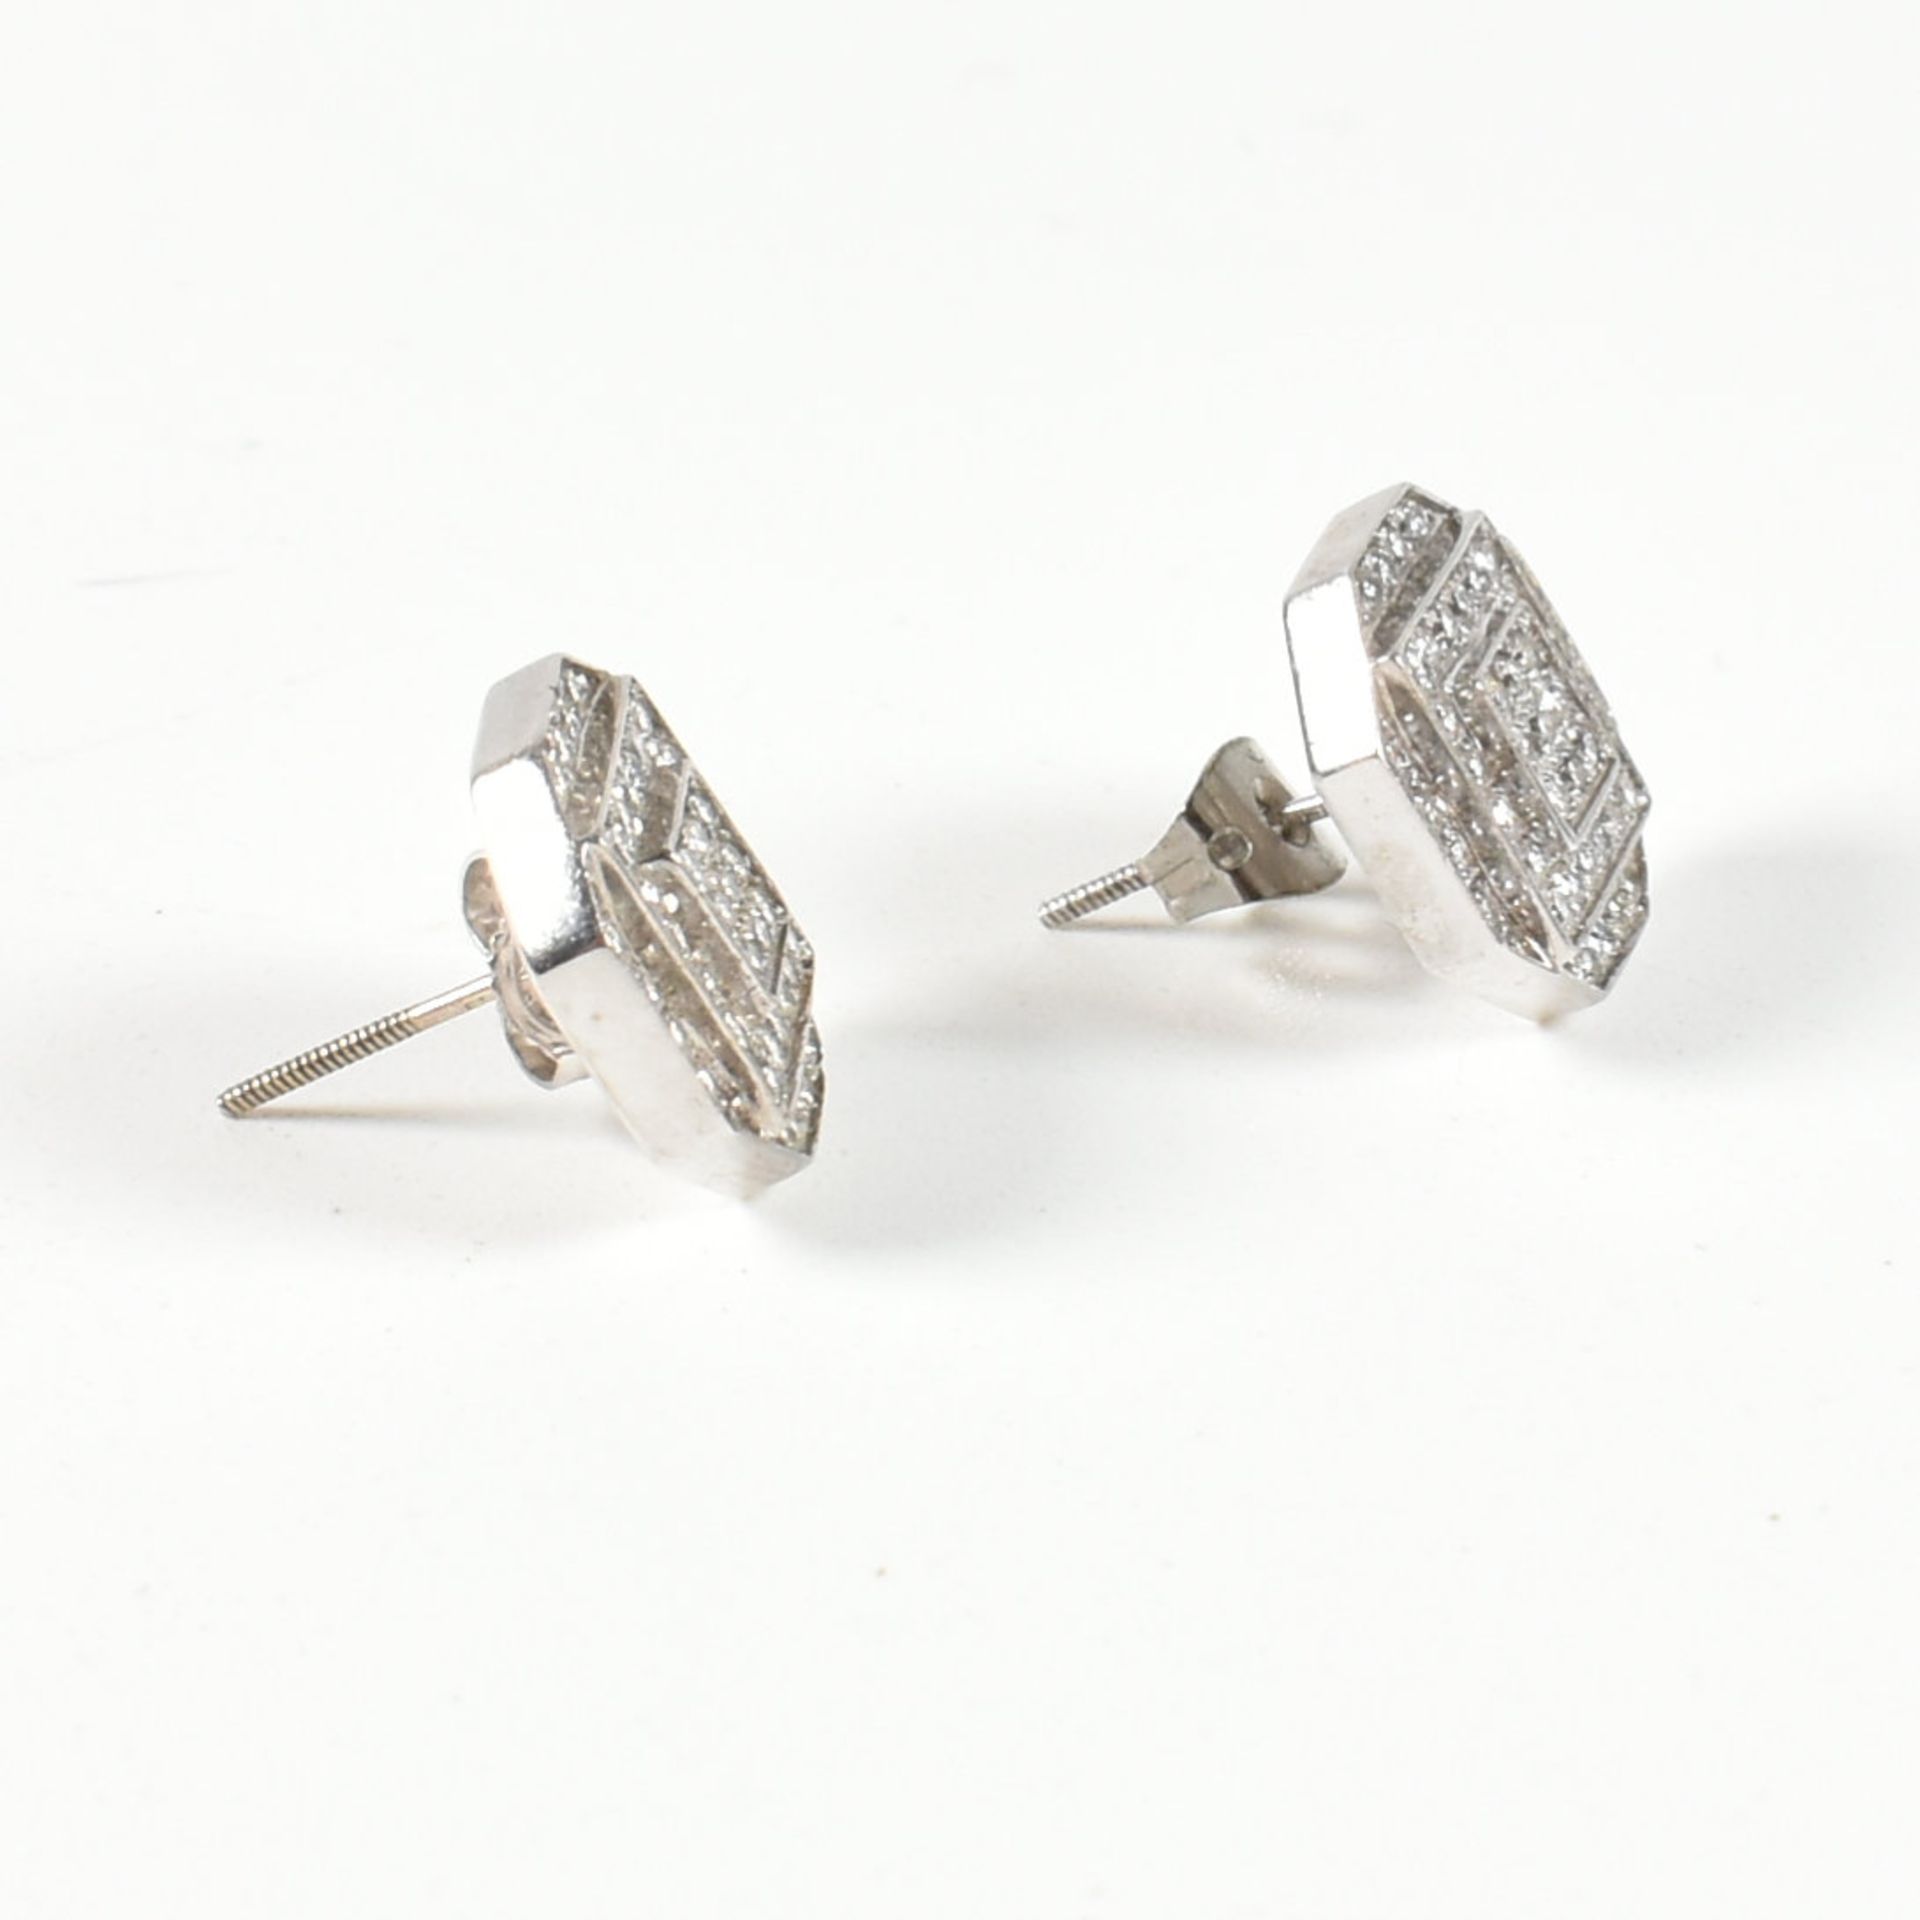 PAIR OF WHITE GOLD & DIAMOND ART DECO STYLE CLUSTER EARRINGS - Image 3 of 5